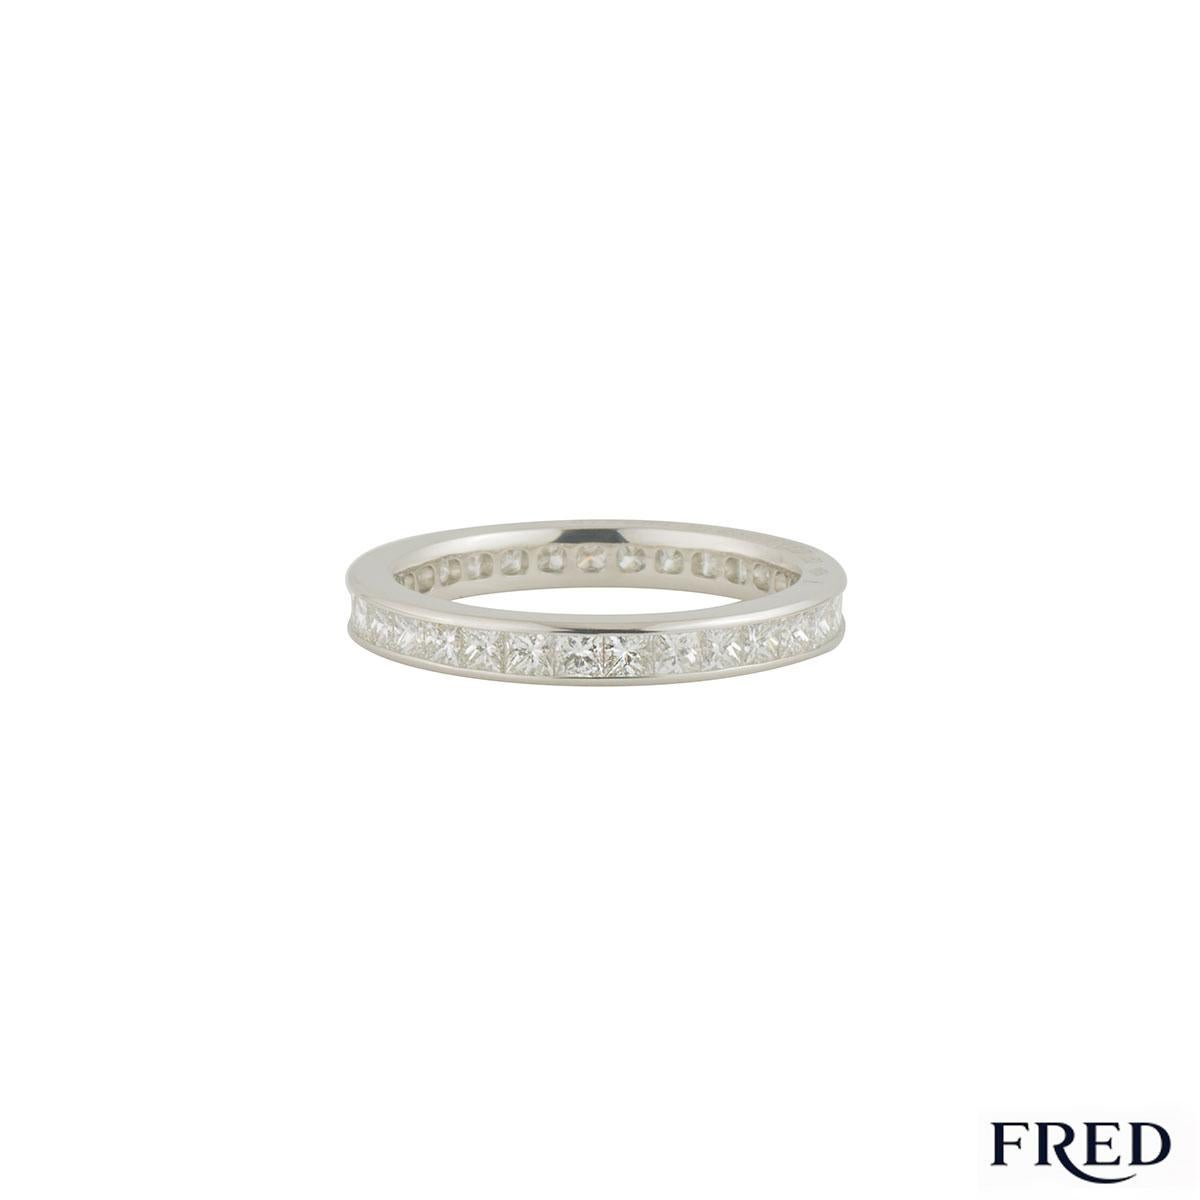 A beautiful platinum Fred diamond eternity ring from the Bridal collection. The ring comprises of 24 princess cut diamonds in a tension setting all the way around the ring. The diamonds have a total weight of approximately 1.92ct, G+ colour and VS+